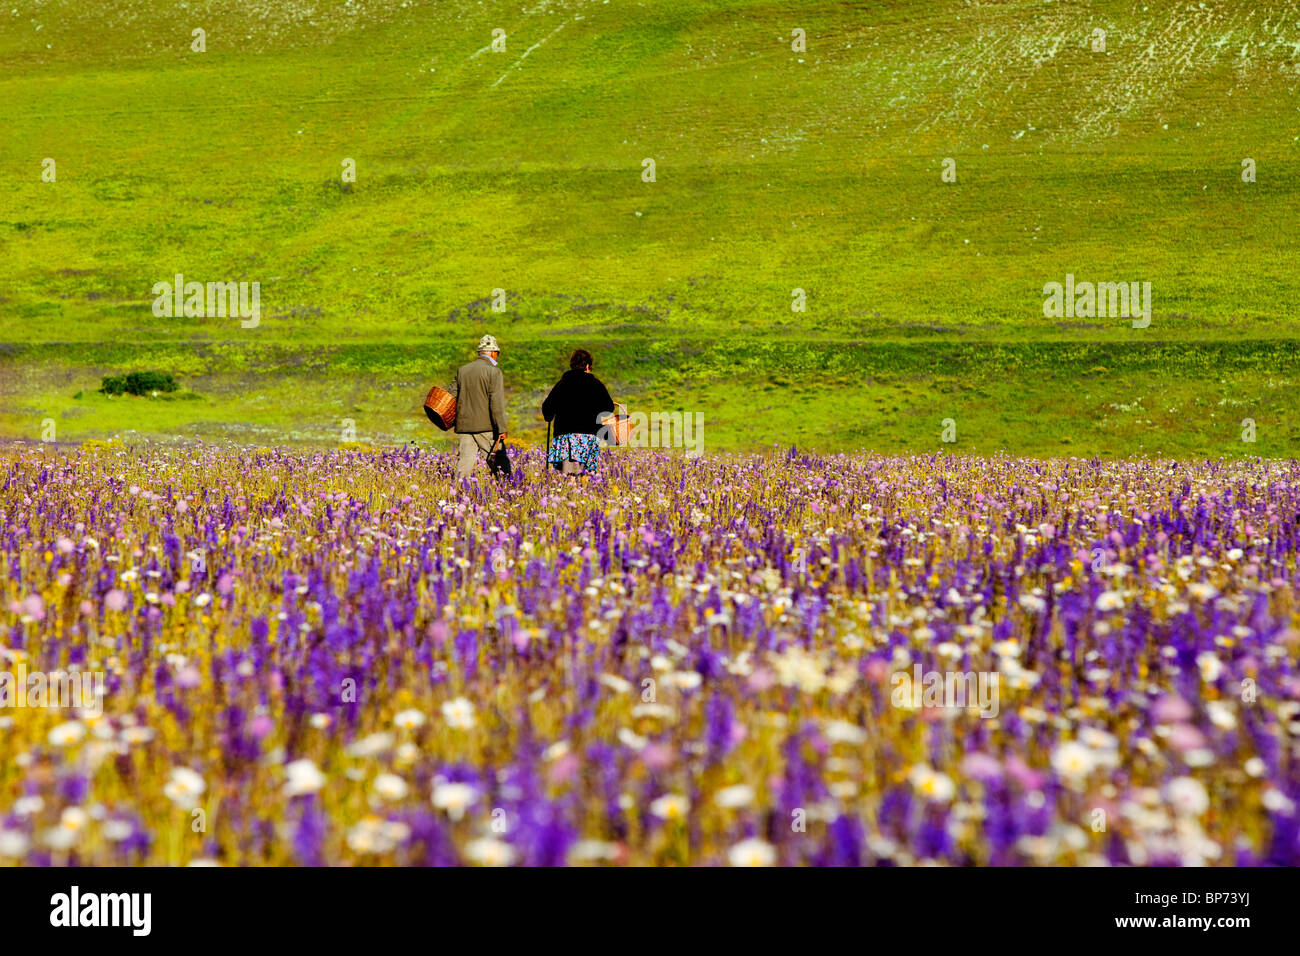 Elderly couple searching for Mushrooms amid acres of wildflowers in the Piano Grande near Castelluccio, Umbria Italy Stock Photo